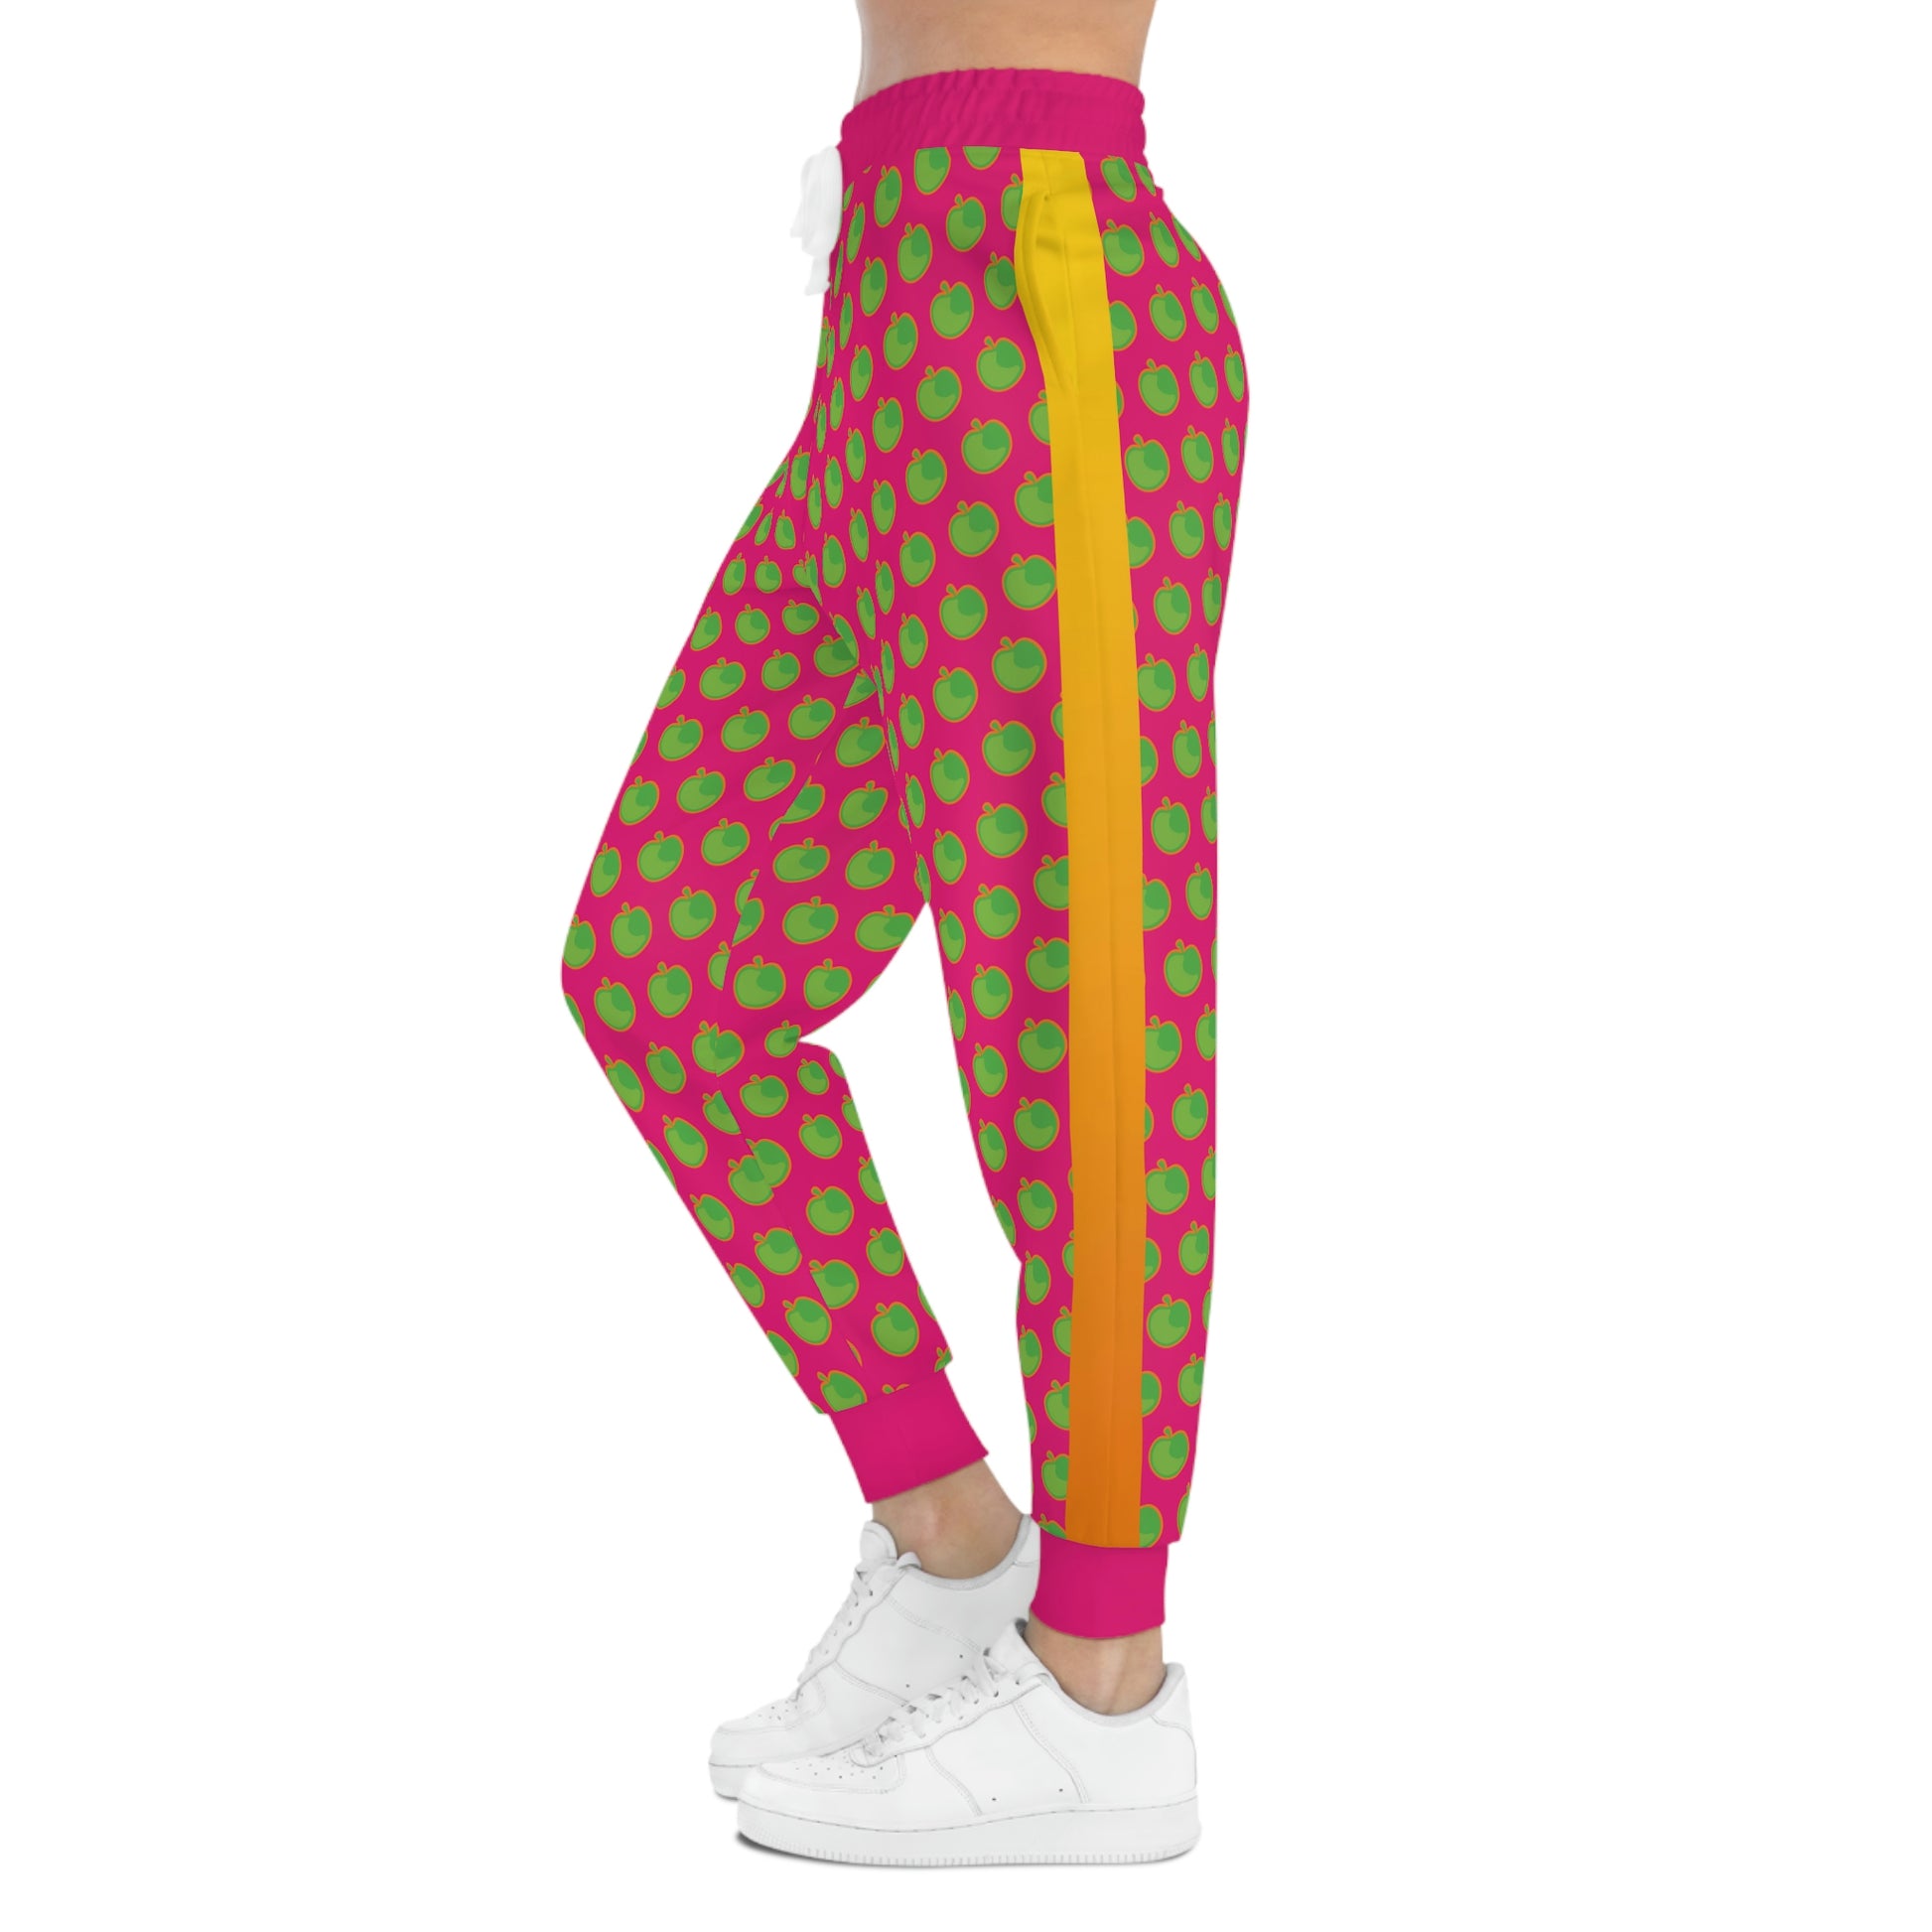 Weirdo | This athletic joggers for a woman, is pink and has apples printed all over the jogging pants. These joggers are ideal to chill in or to go for a jog.